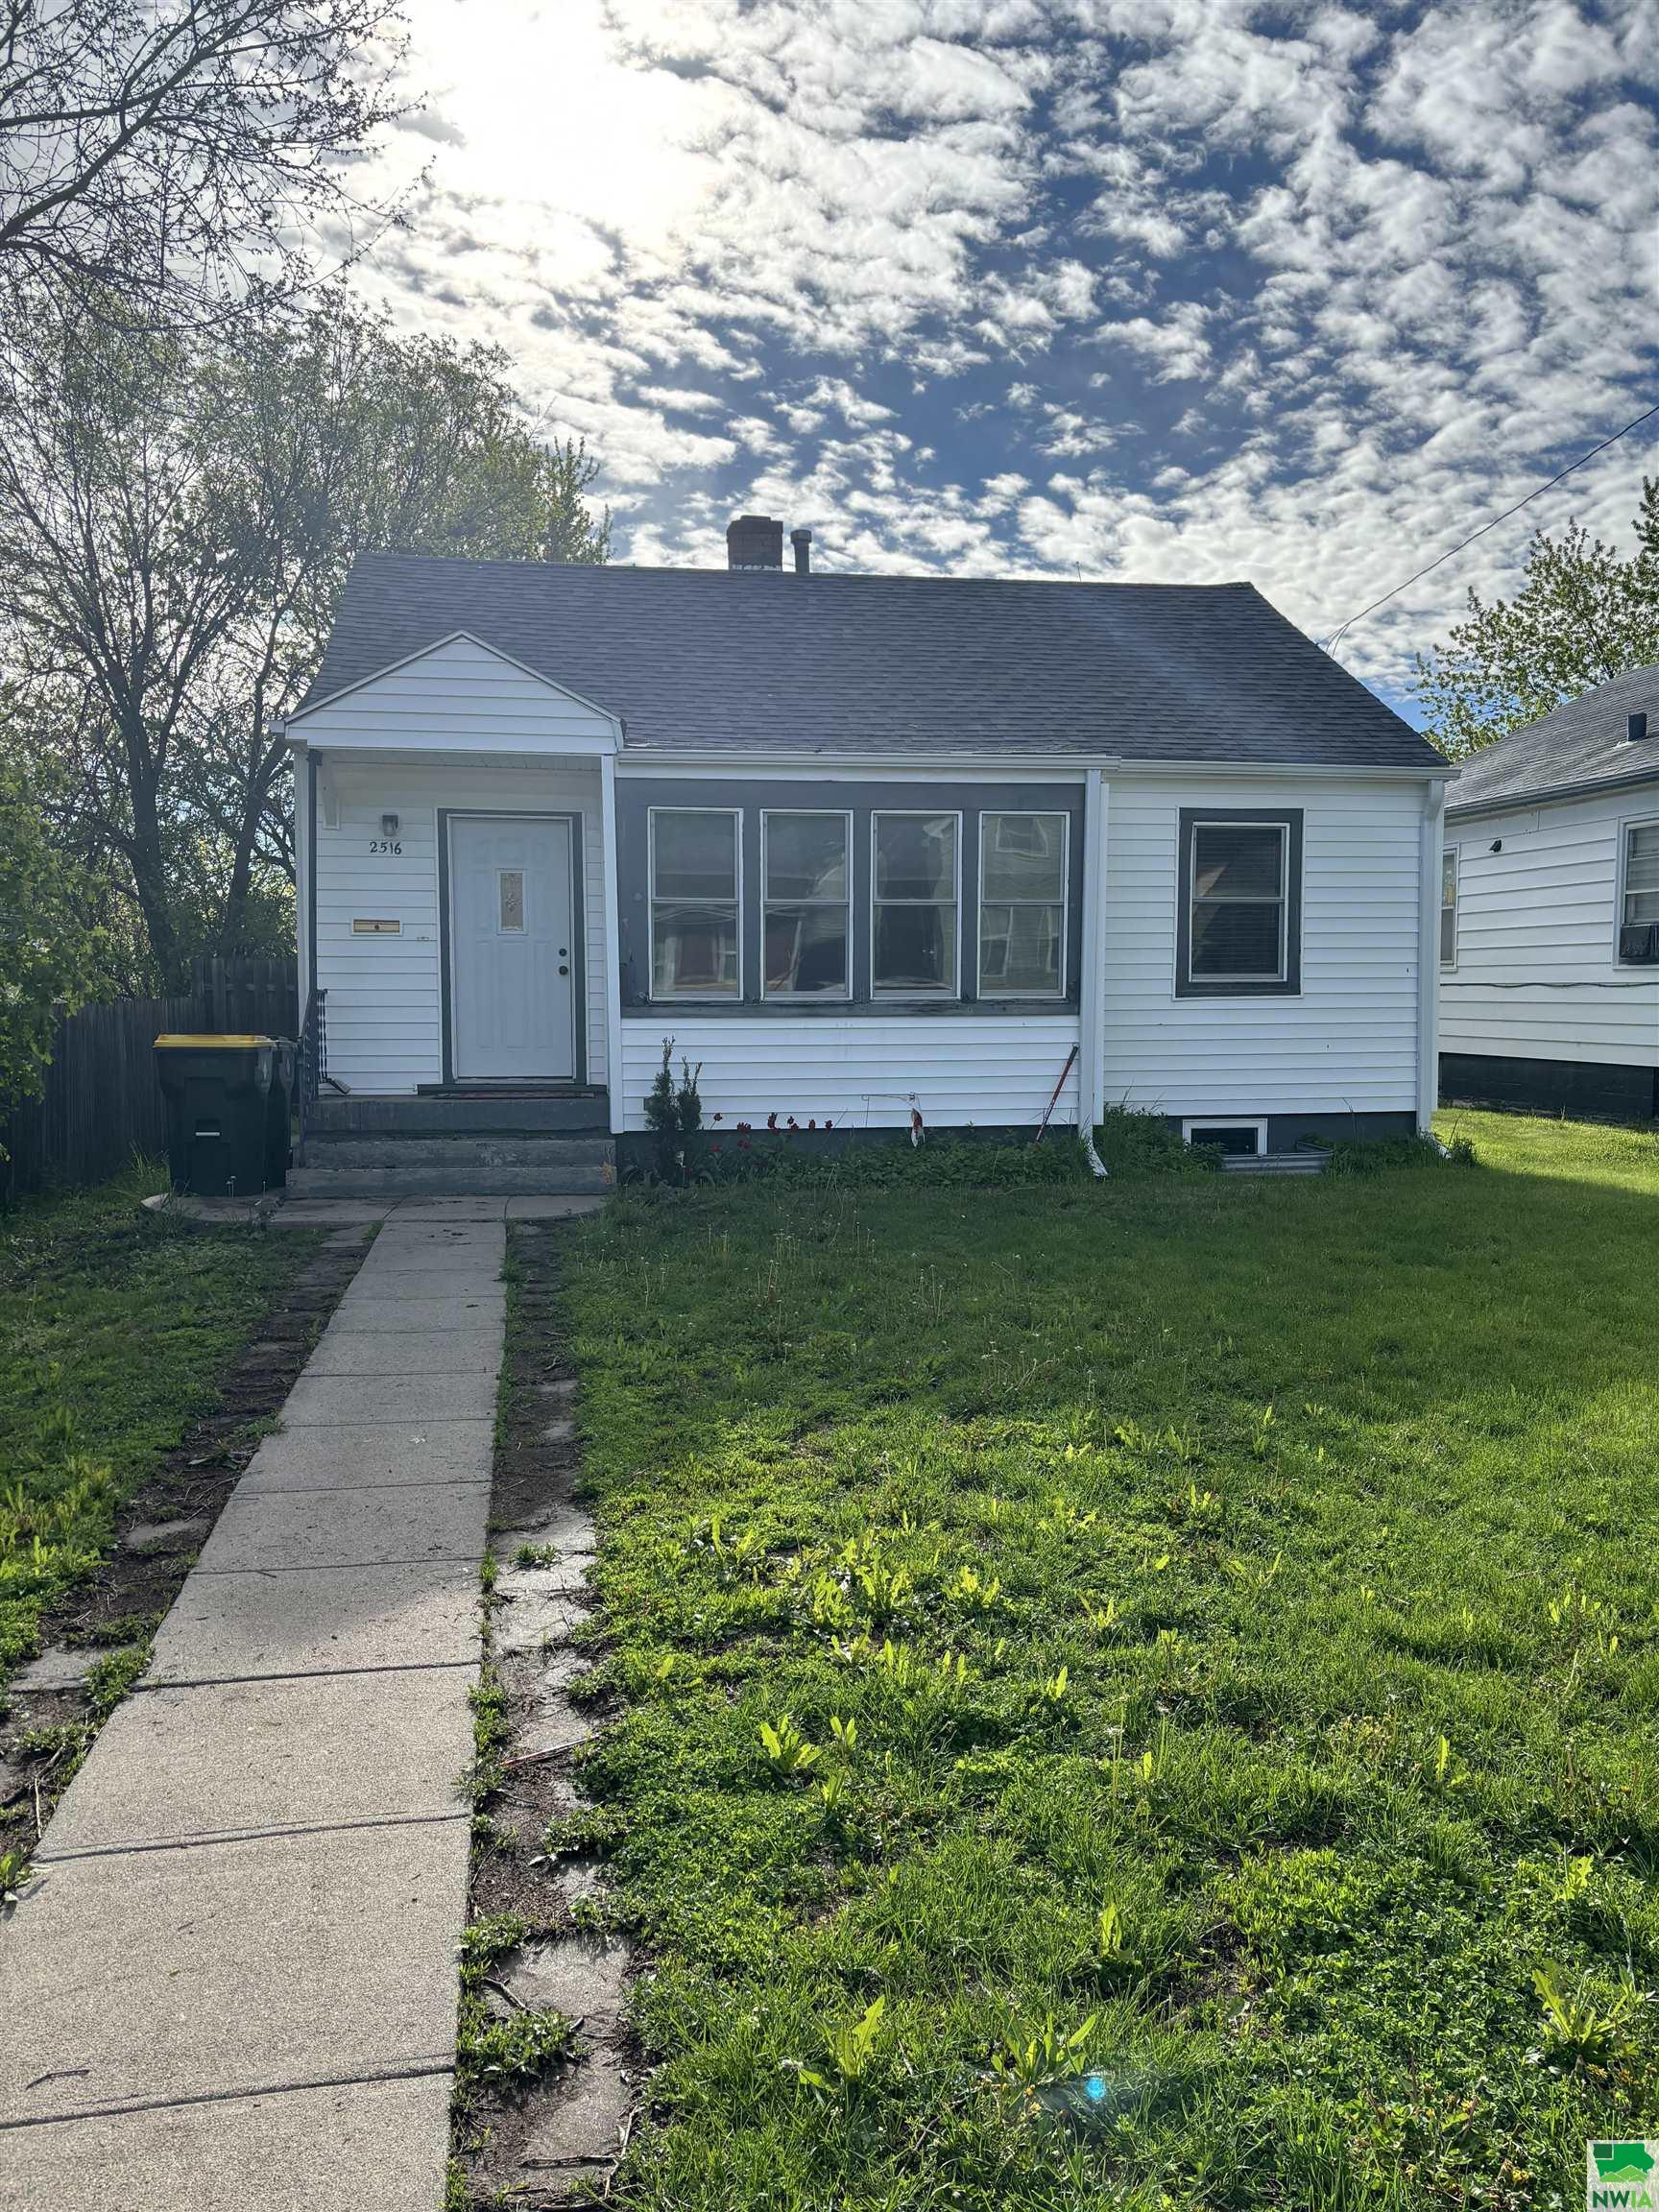 2516 George, Sioux City, 51103 